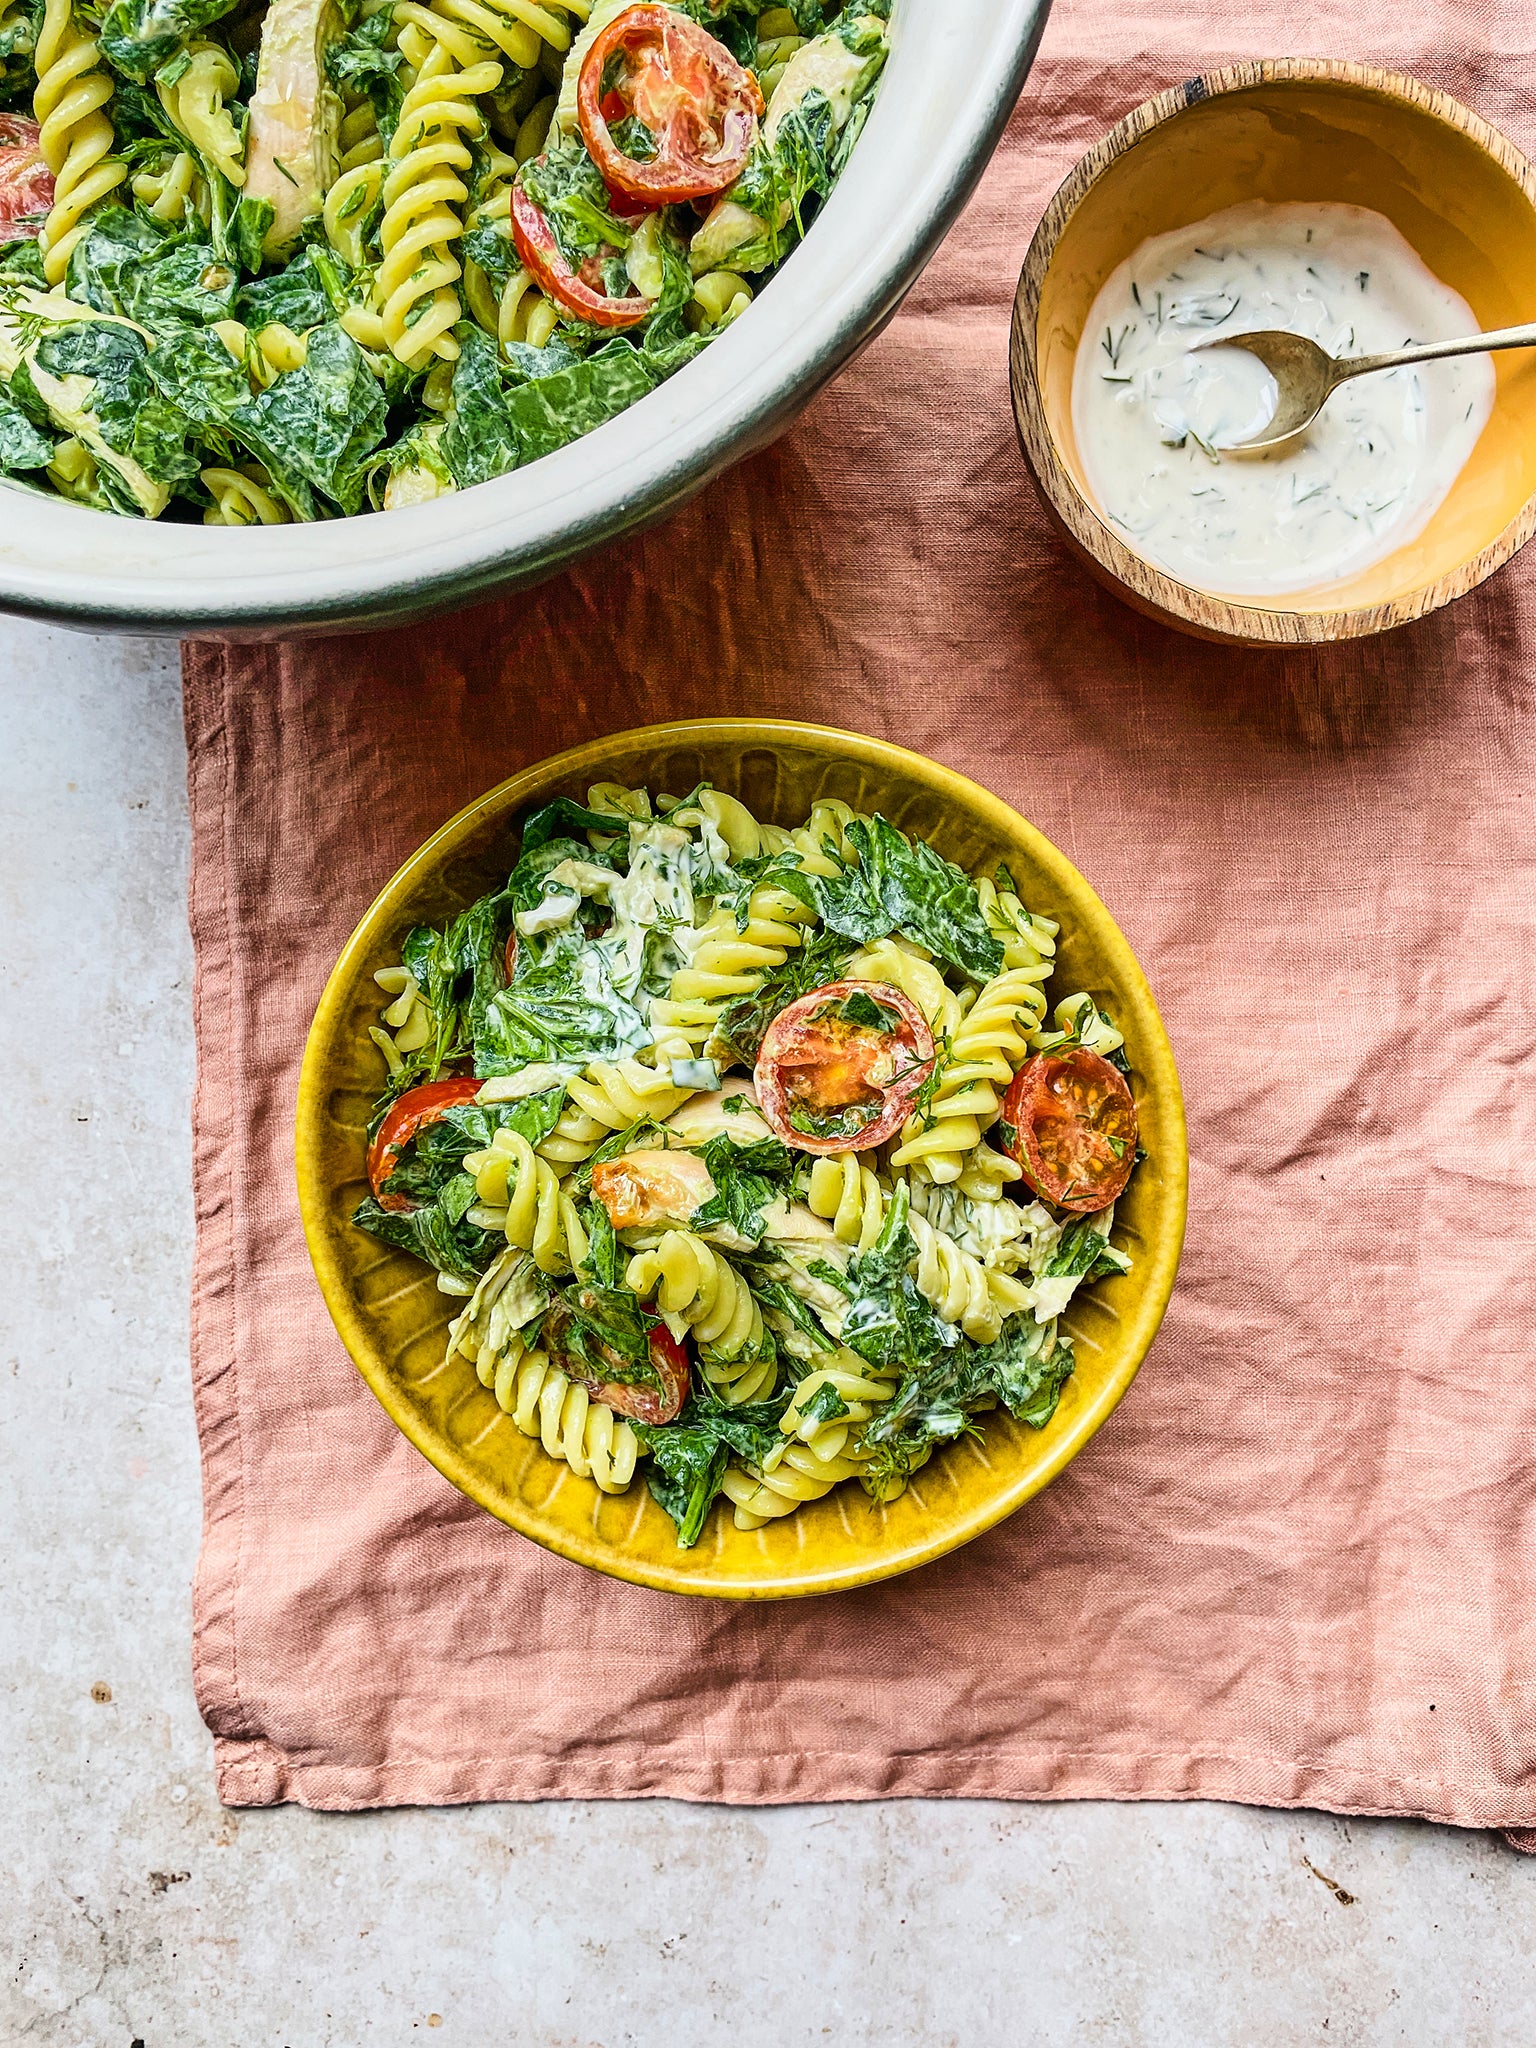 This spinach, chicken and tomato pasta salad brings a taste of the Med to lunchtime